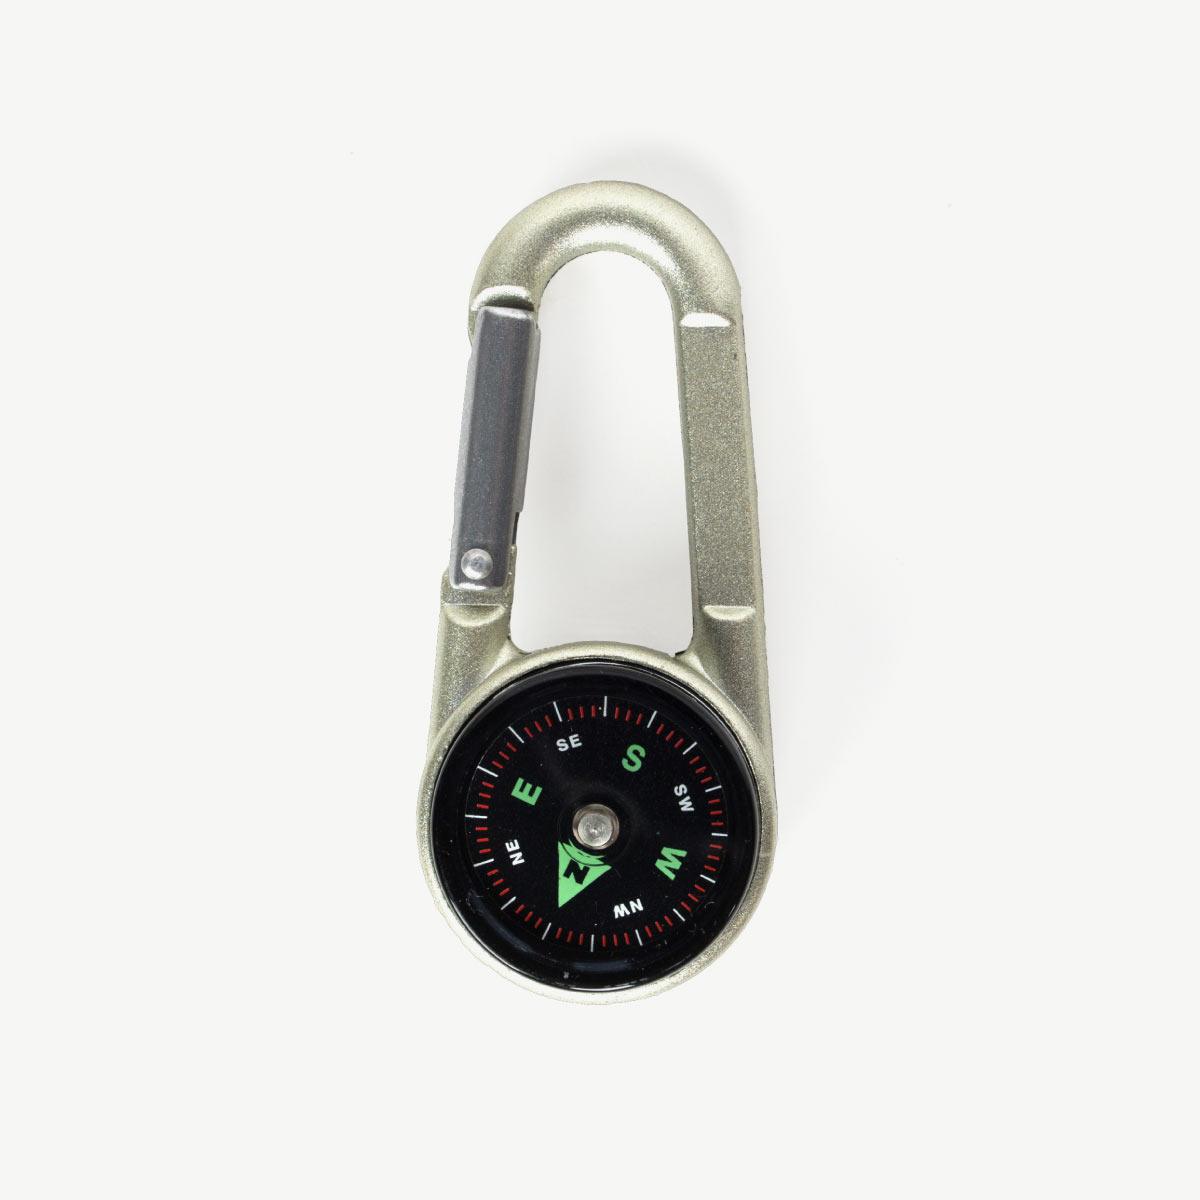 Mini Multifunction 3 in 1 Hiking Travel Compass Thermometer Carabiner Key  Ring